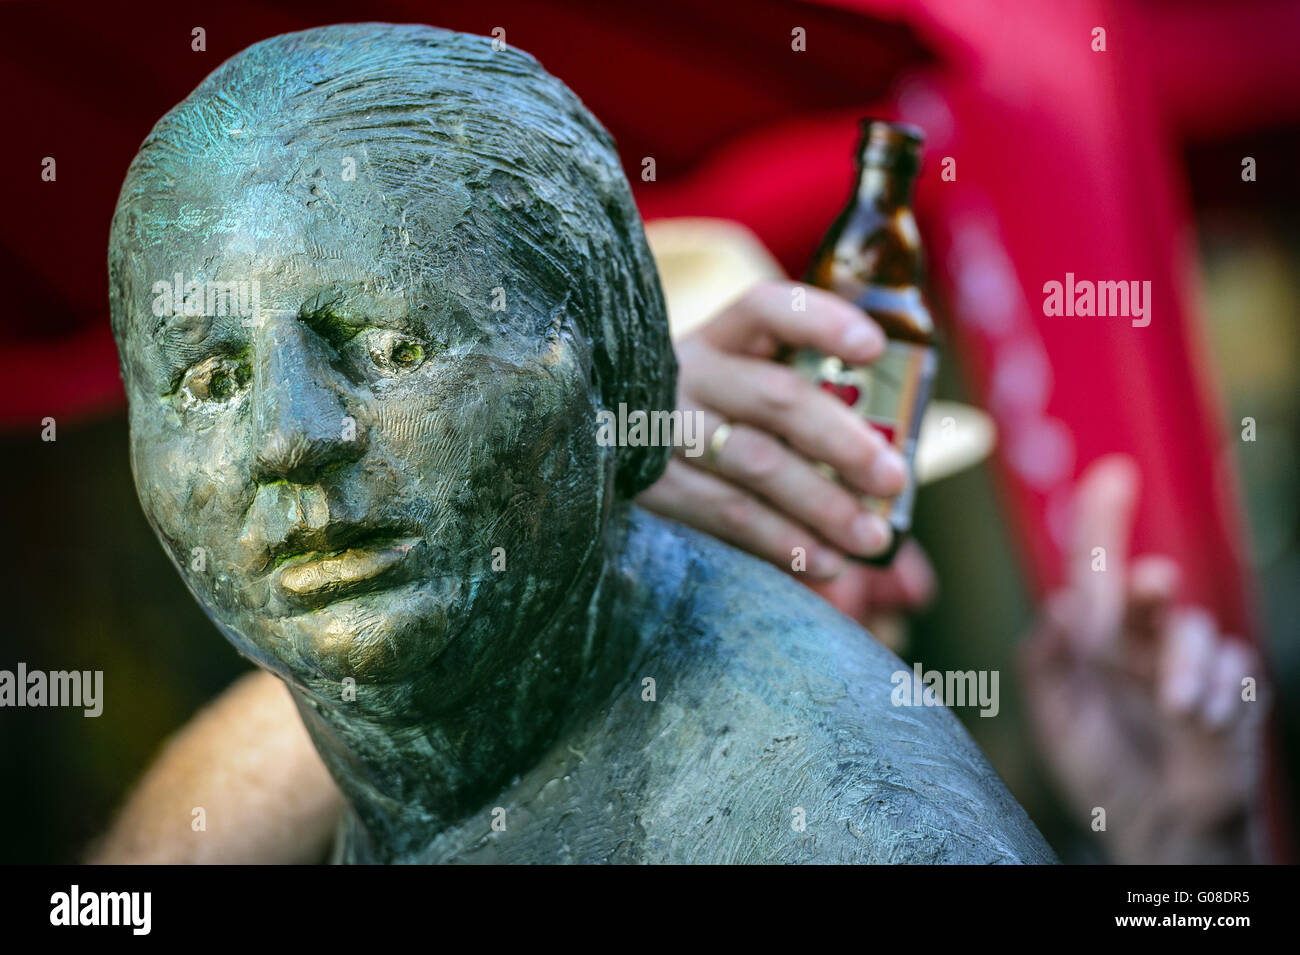 Man with beer bottle based on a bronze statue Stock Photo